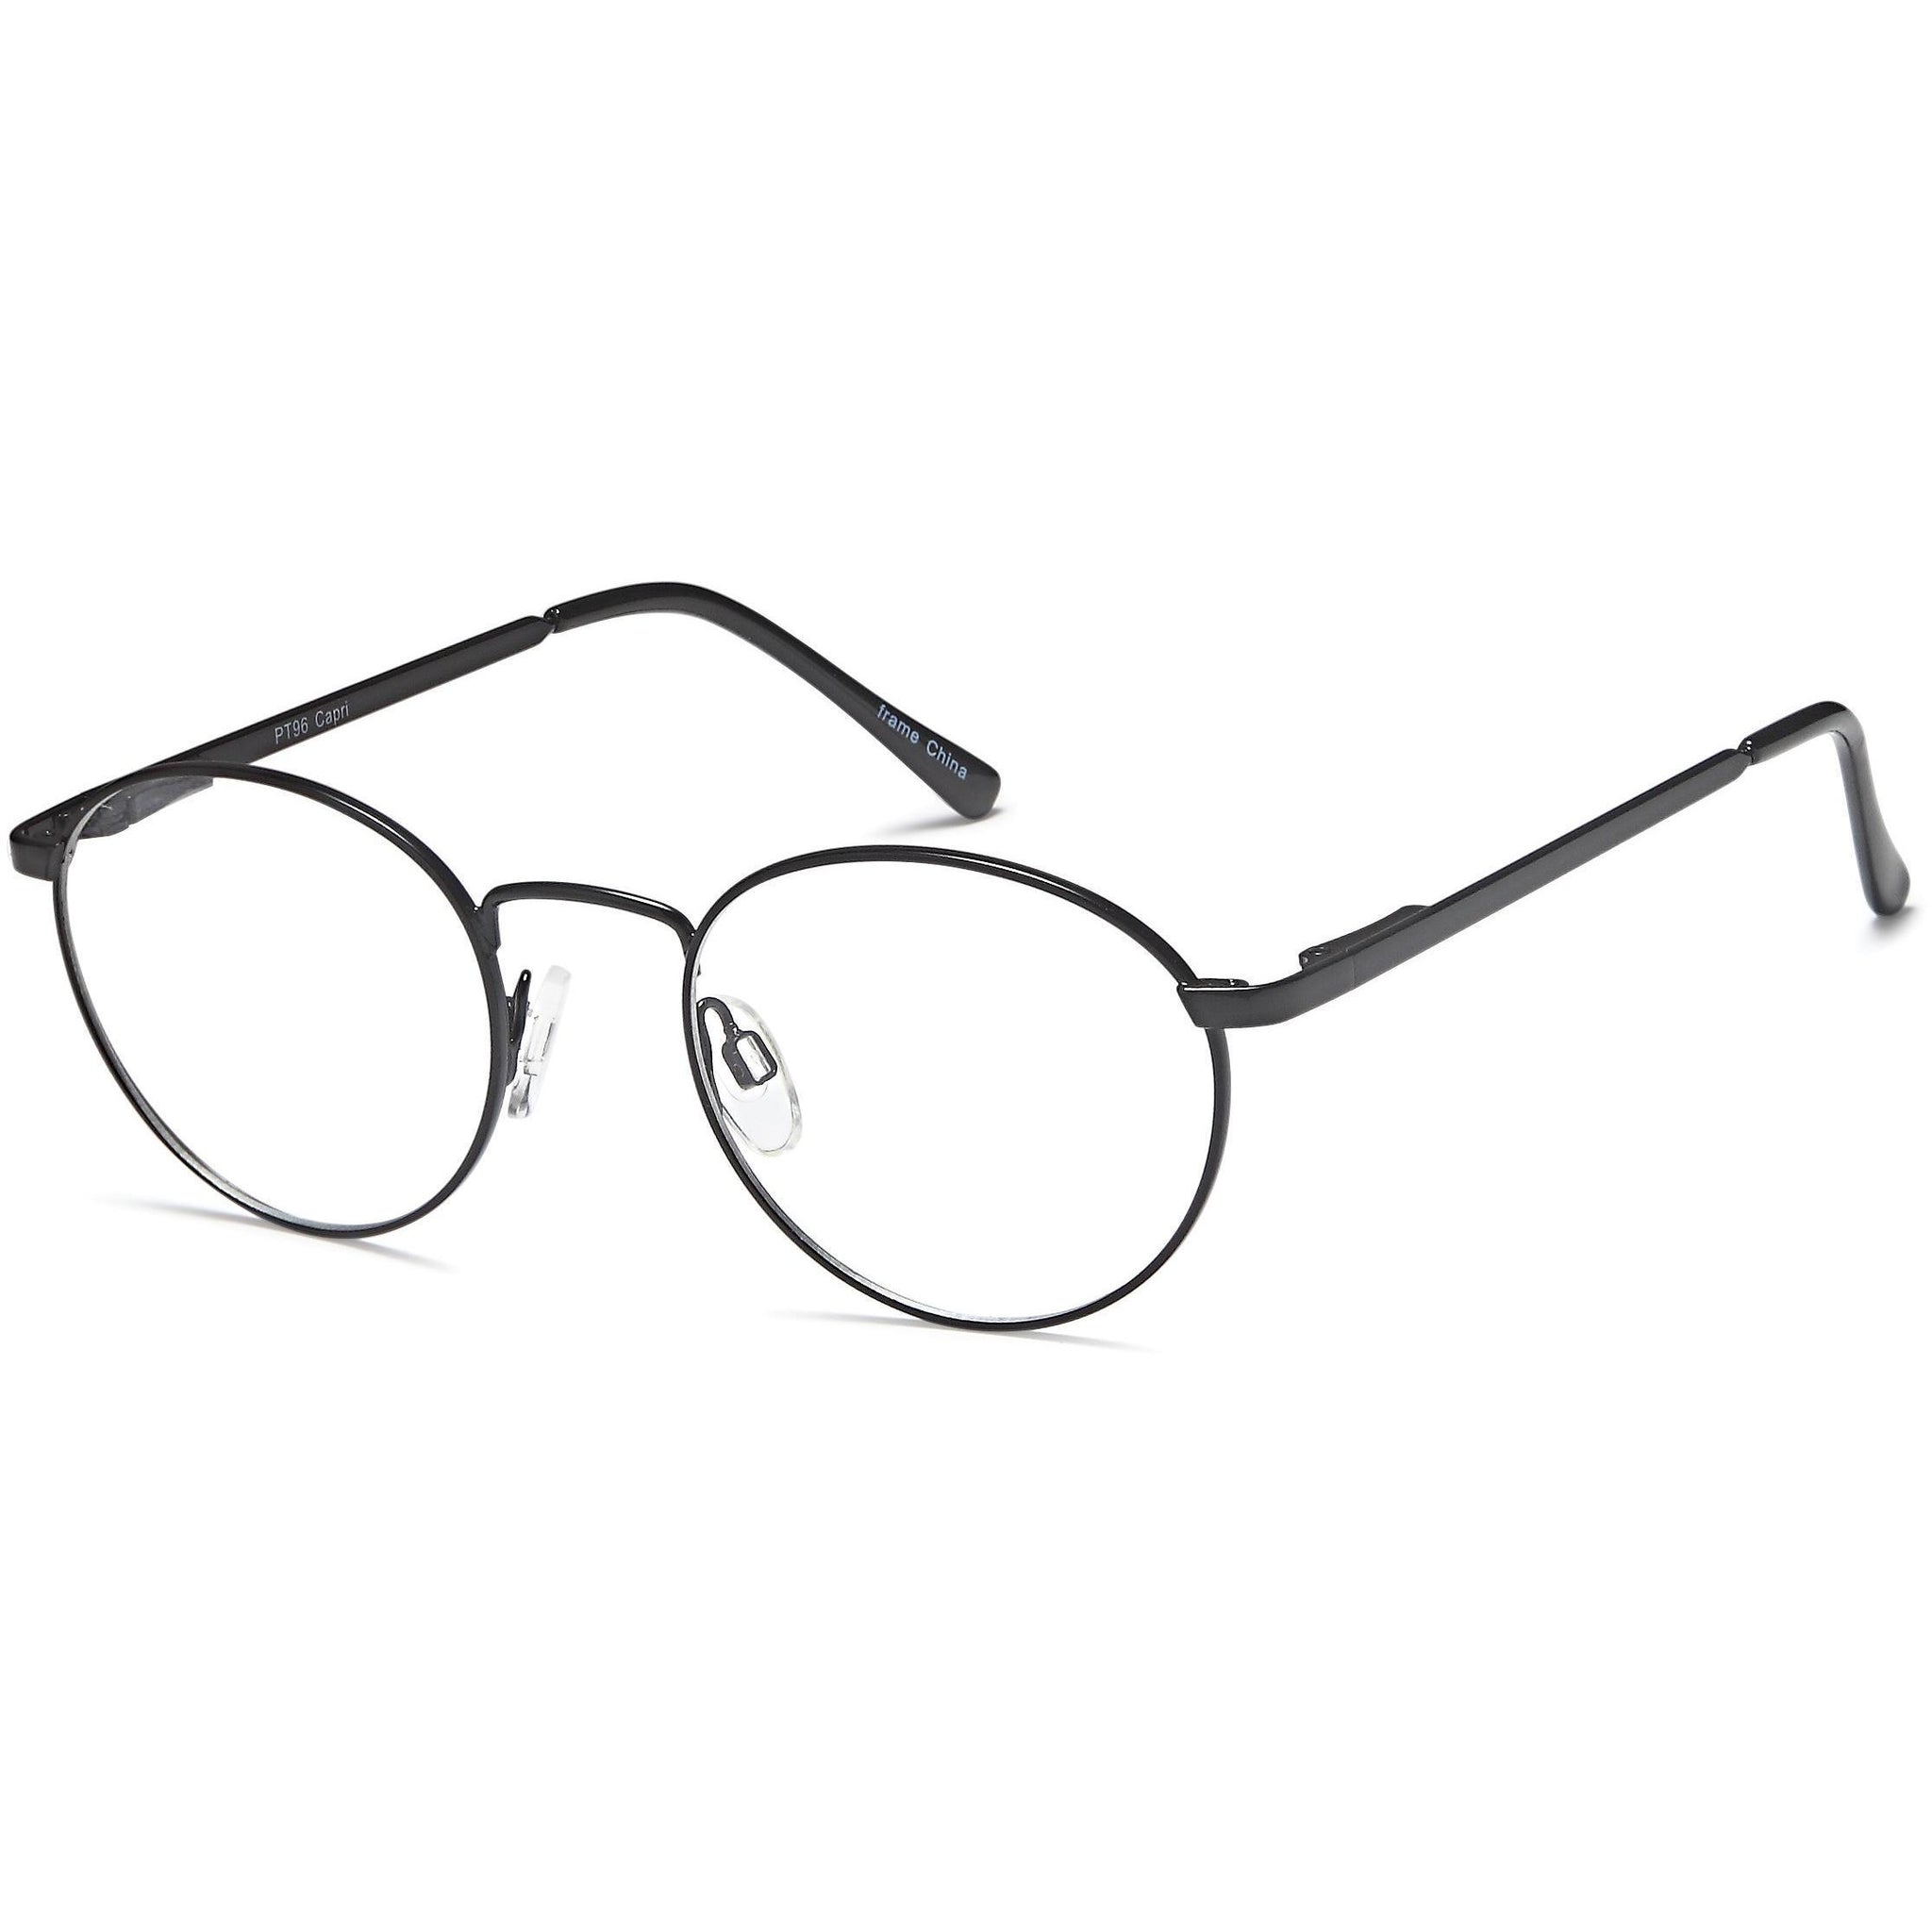 Harry by The Square Mile Round Juniors Optical Glasses - timetoshade